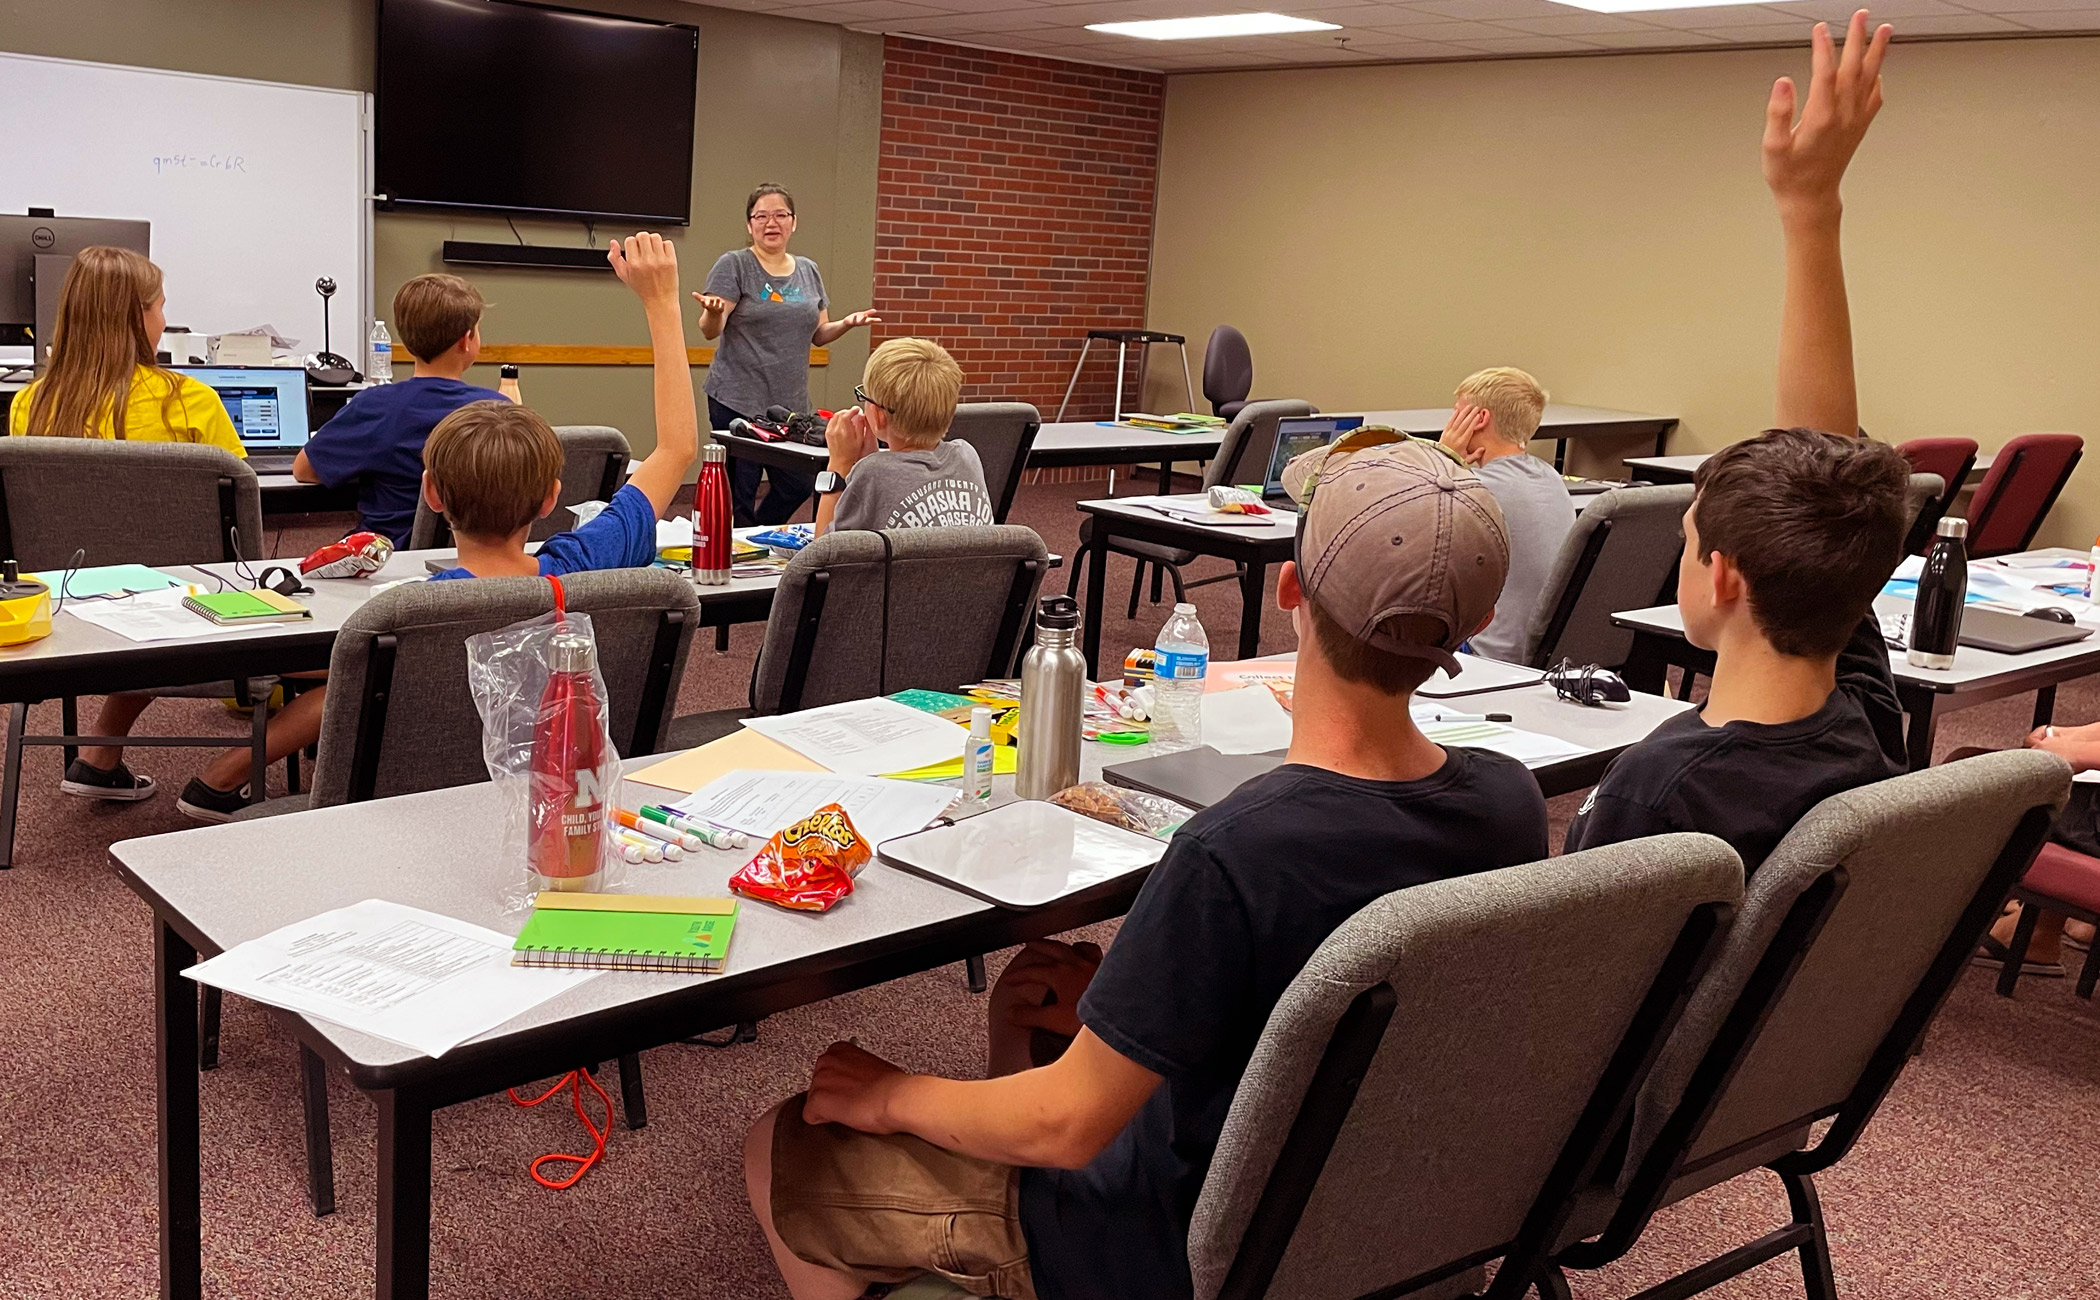 A tan and brick walled classroom setting. Instructor speaking to a group of students. Lots of school supplies and snacks sitting on tables. Photo taken from the back of the room. 